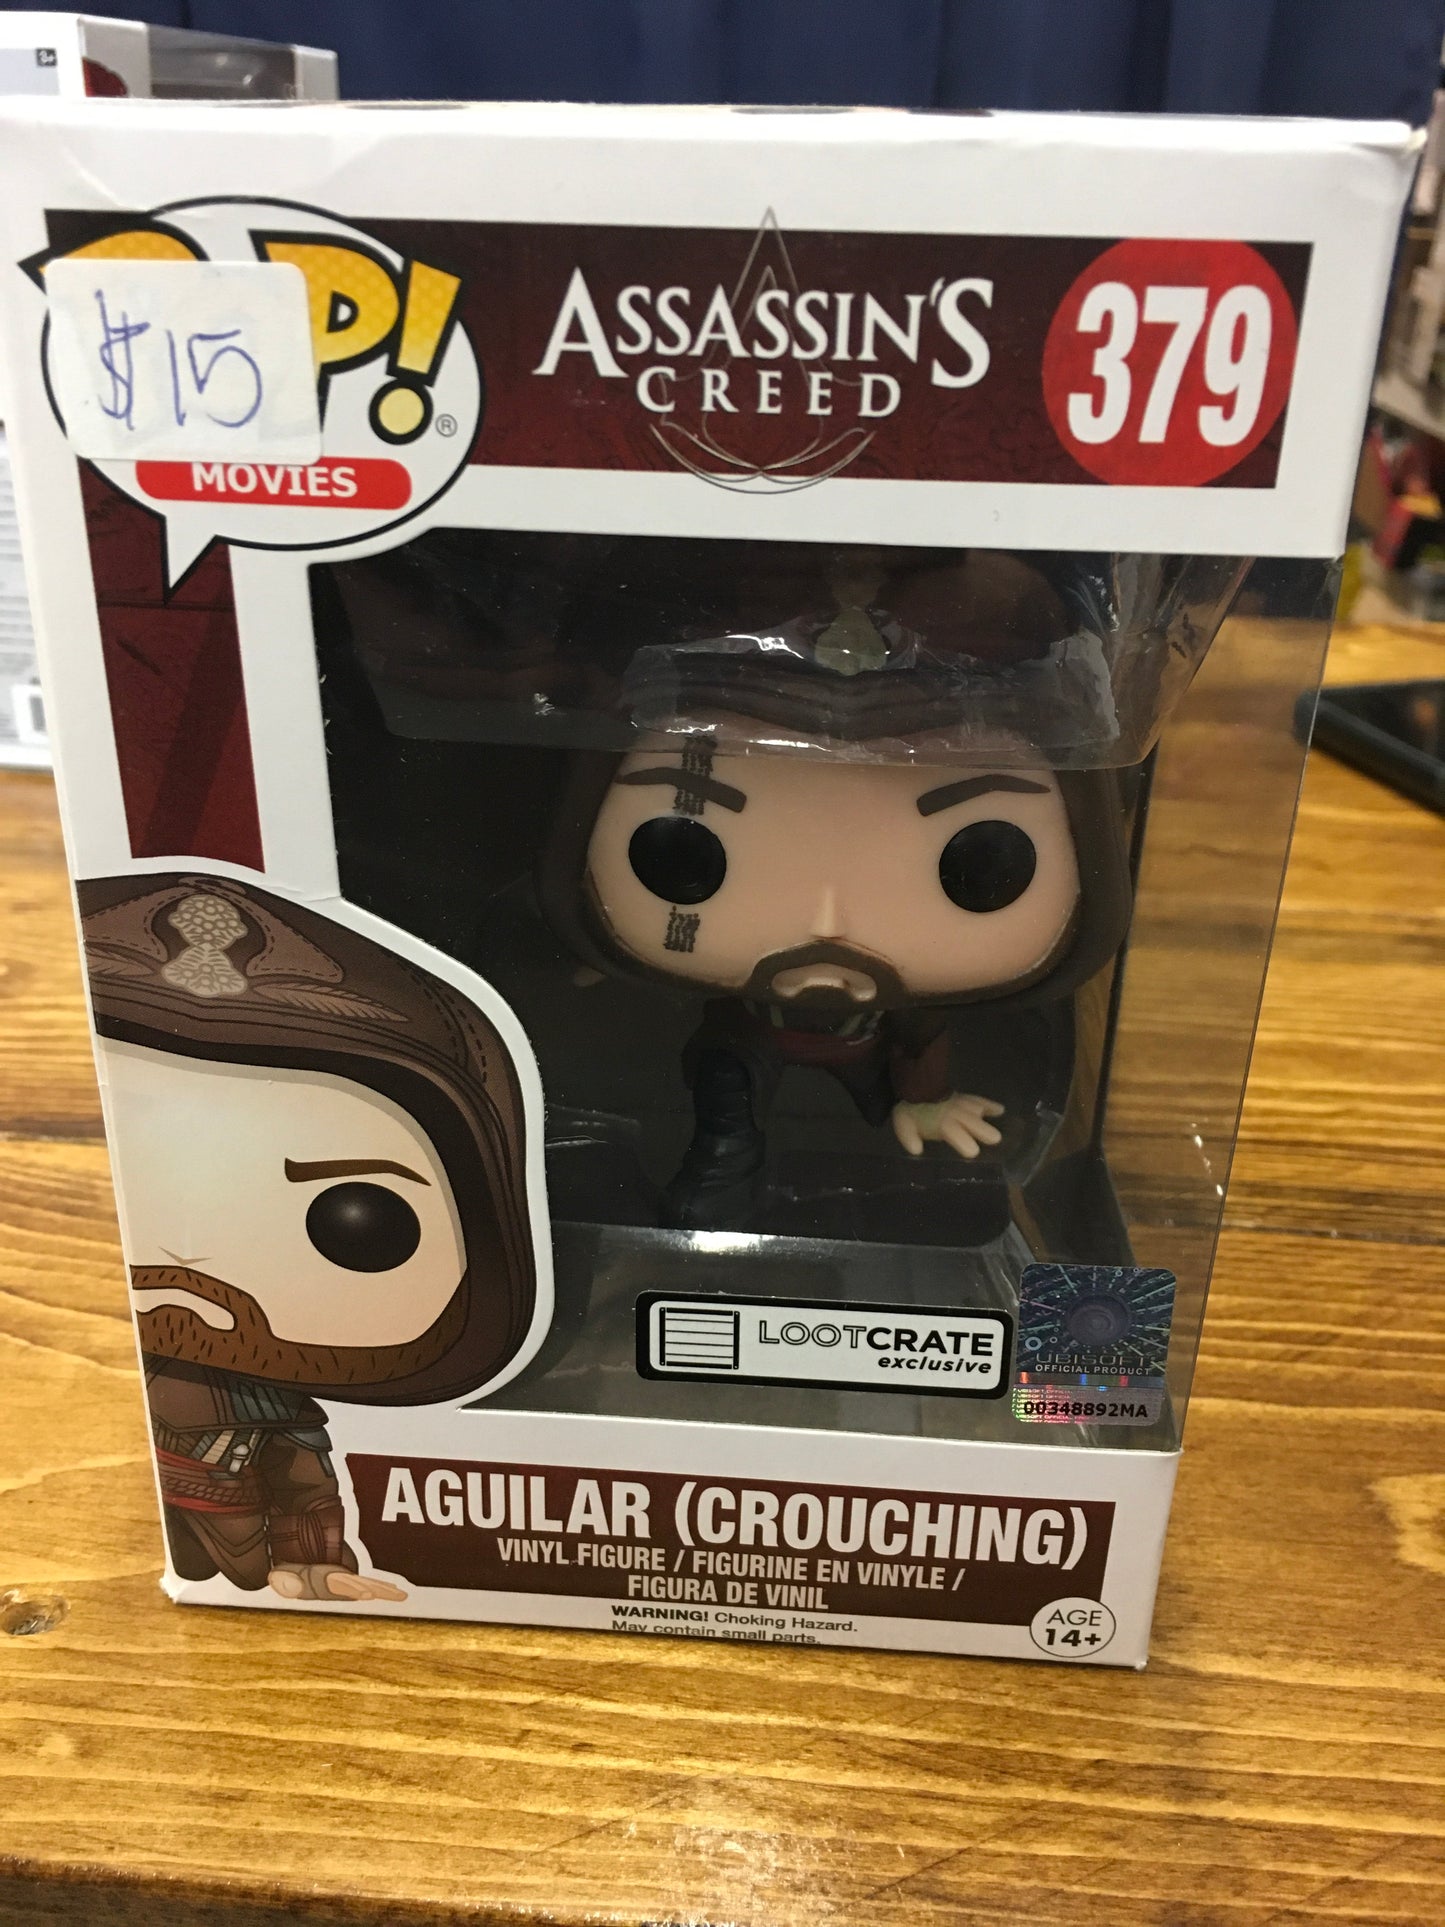 Assassin’s Creed Aguilar crouching exclusive Funko Pop! Vinyl Figure (Video games)